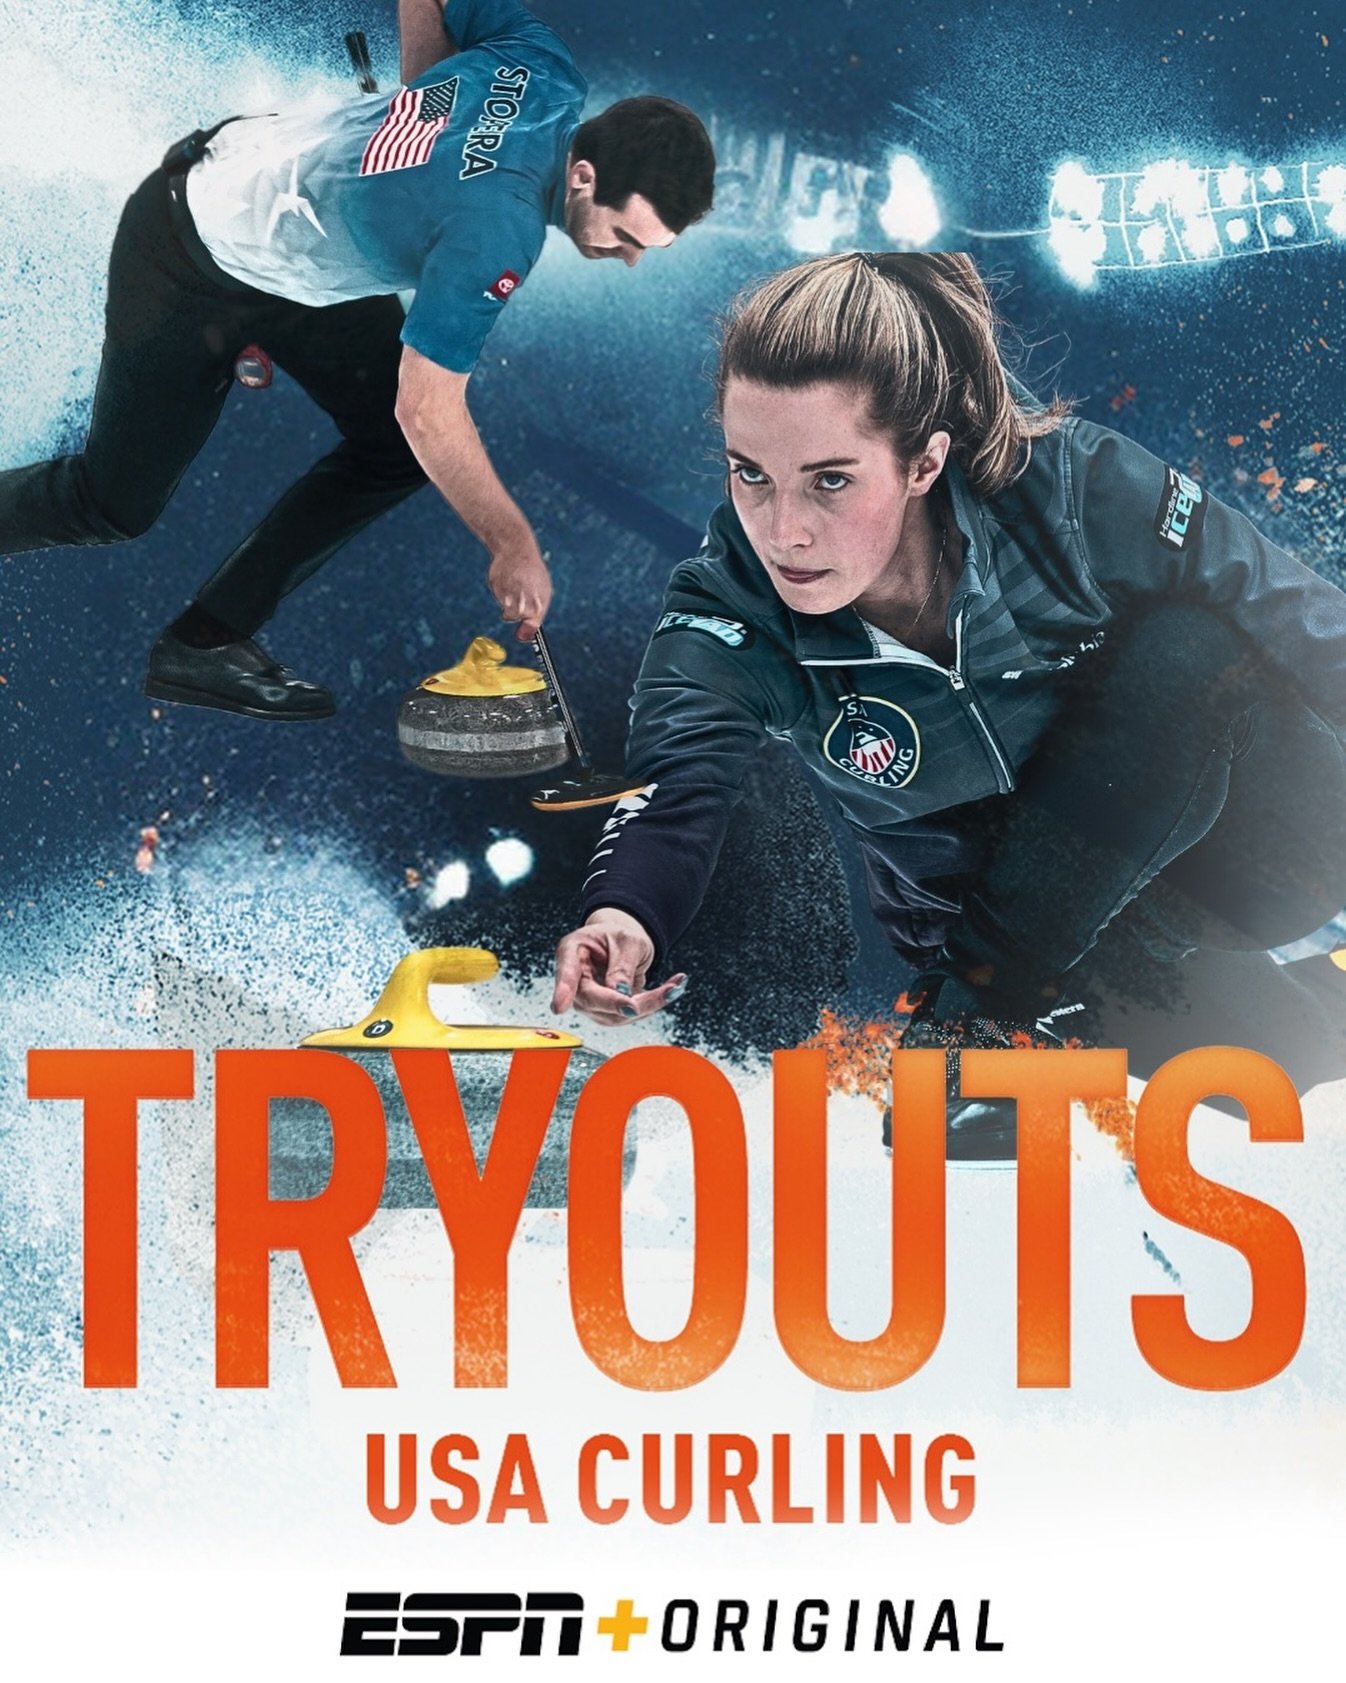 Mark your Calendar❗
The USA Curling episode of the ESPN+ Original series Tryouts, premiers Wednesday May 22nd on ESPN+.